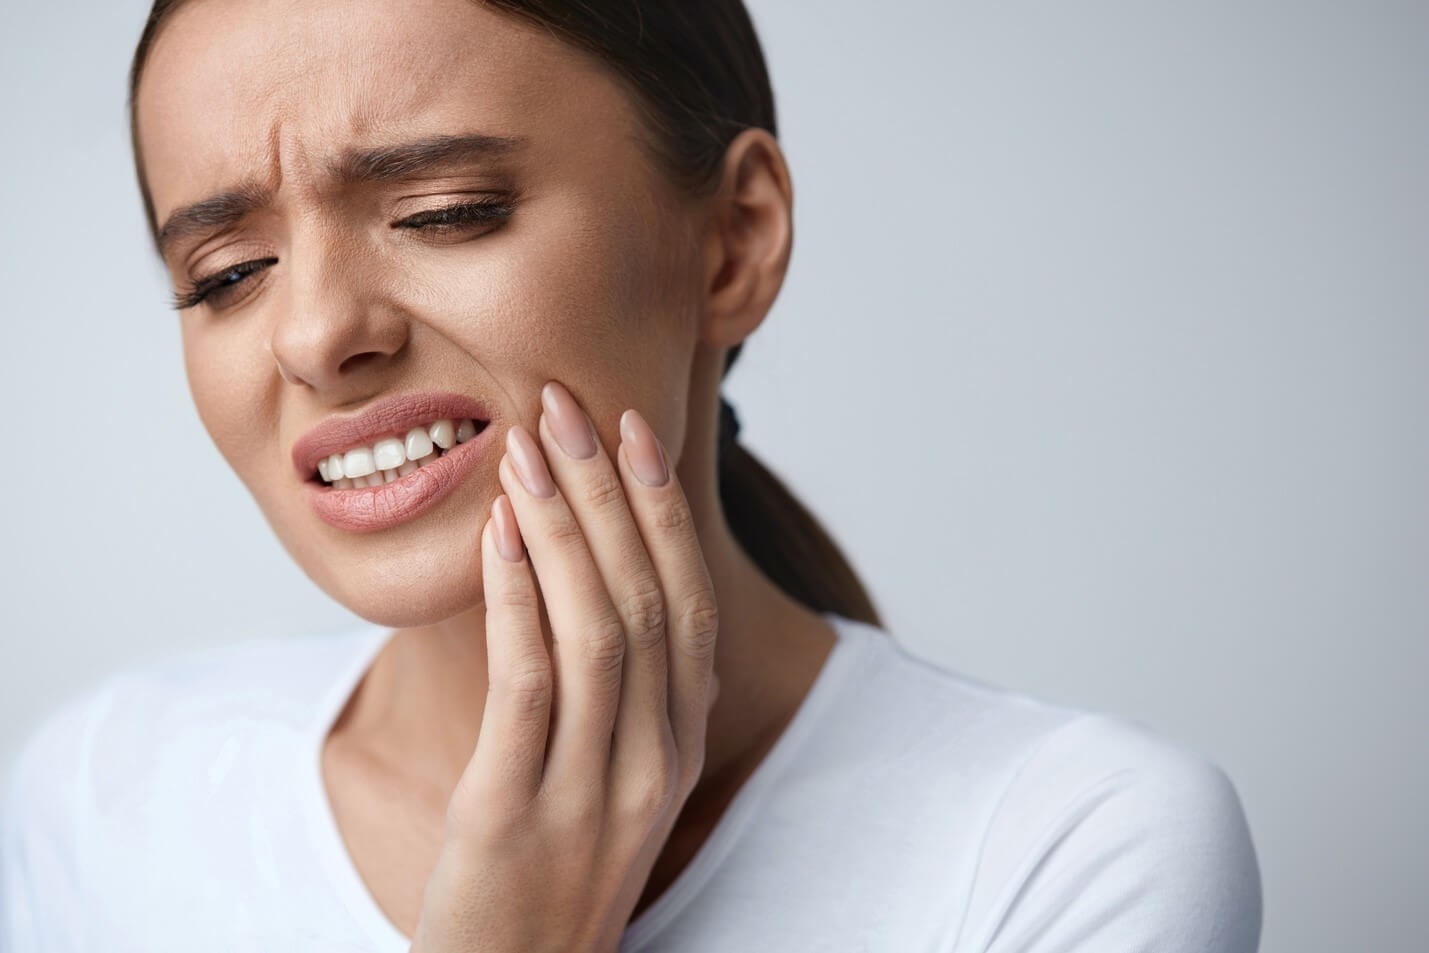 Tooth ache and home remedies